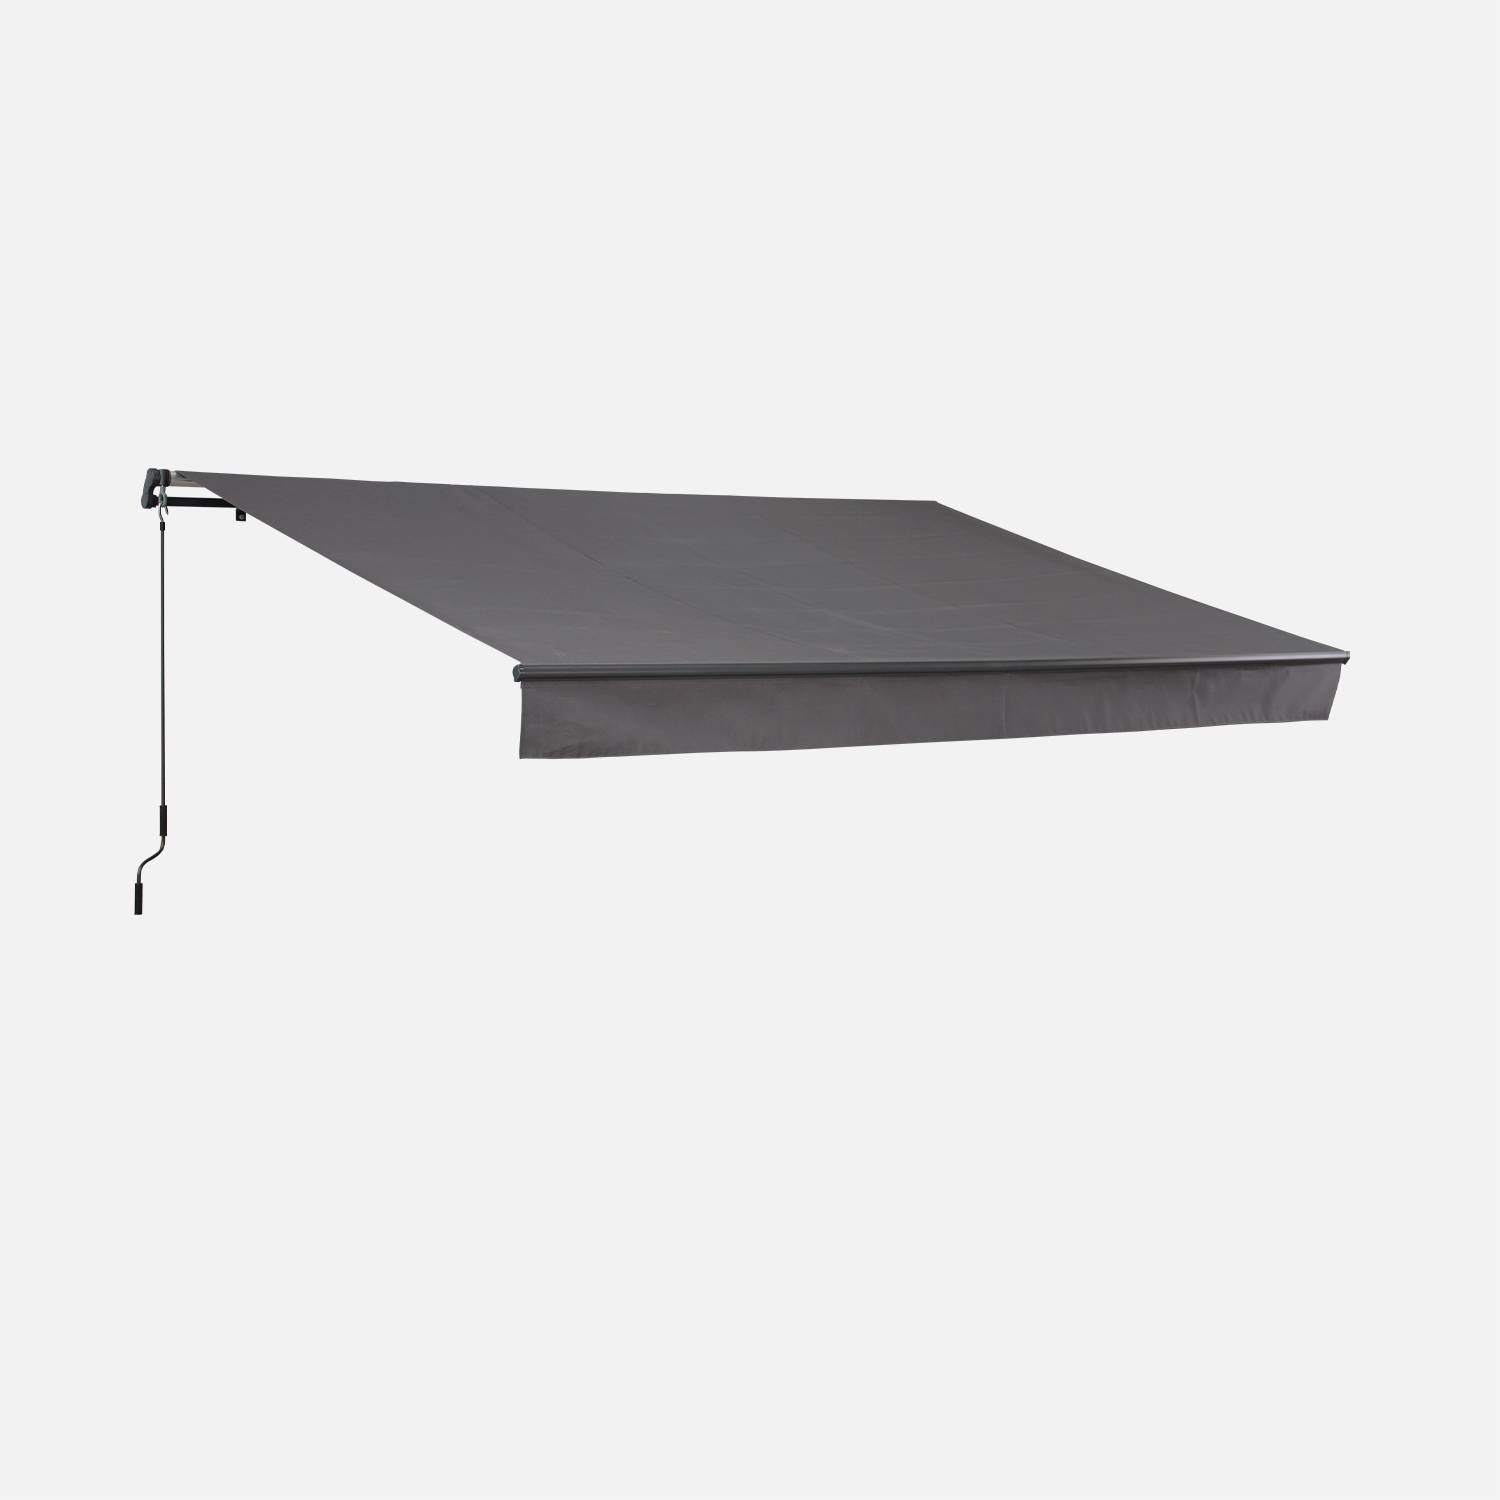 Retractable Patio Awning - wall awning, aluminium structure, manual system, coated polyester fabric - Alombra 4x2.5m - Grey,sweeek,Photo1